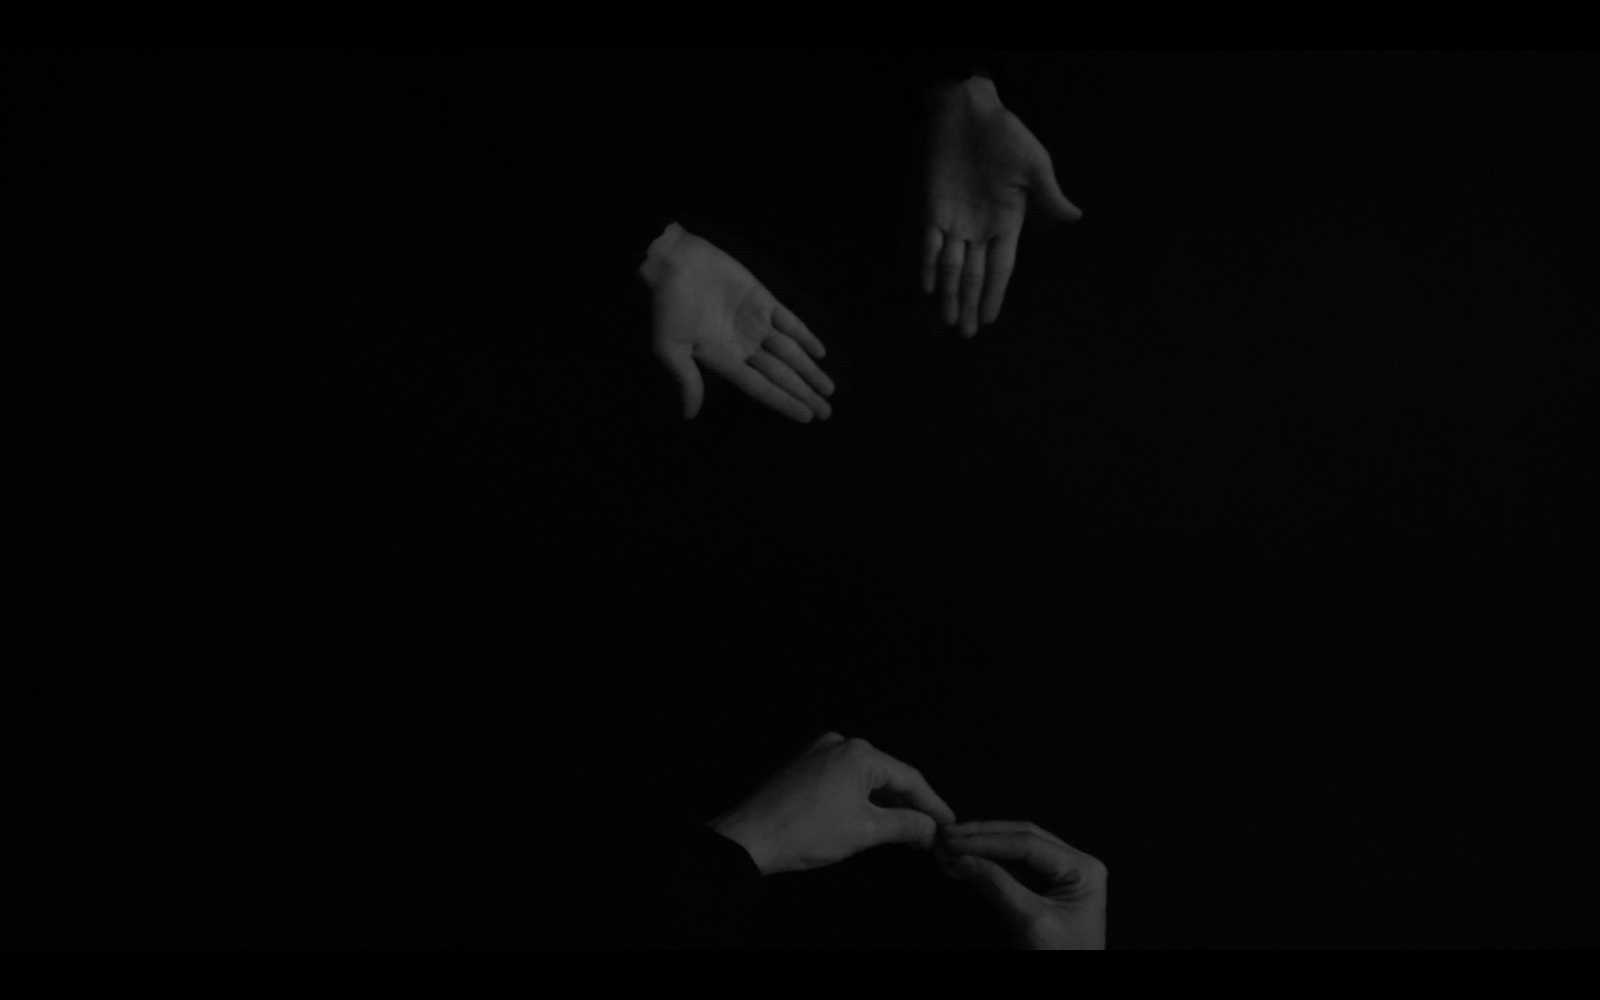 (Still image from A Seduction Trap. Listen,we have it all. Raffia Li & Shape of Language, 2018. )  Visual description: Two hands spreading out with palms up, forming the Chinese sign language word “Now”, but also as the starting position for word “Begin”; two hands folding with all ten finger tips touching, forming the Chinese sign language word “Night”, but also the ending position for word “Finish.”